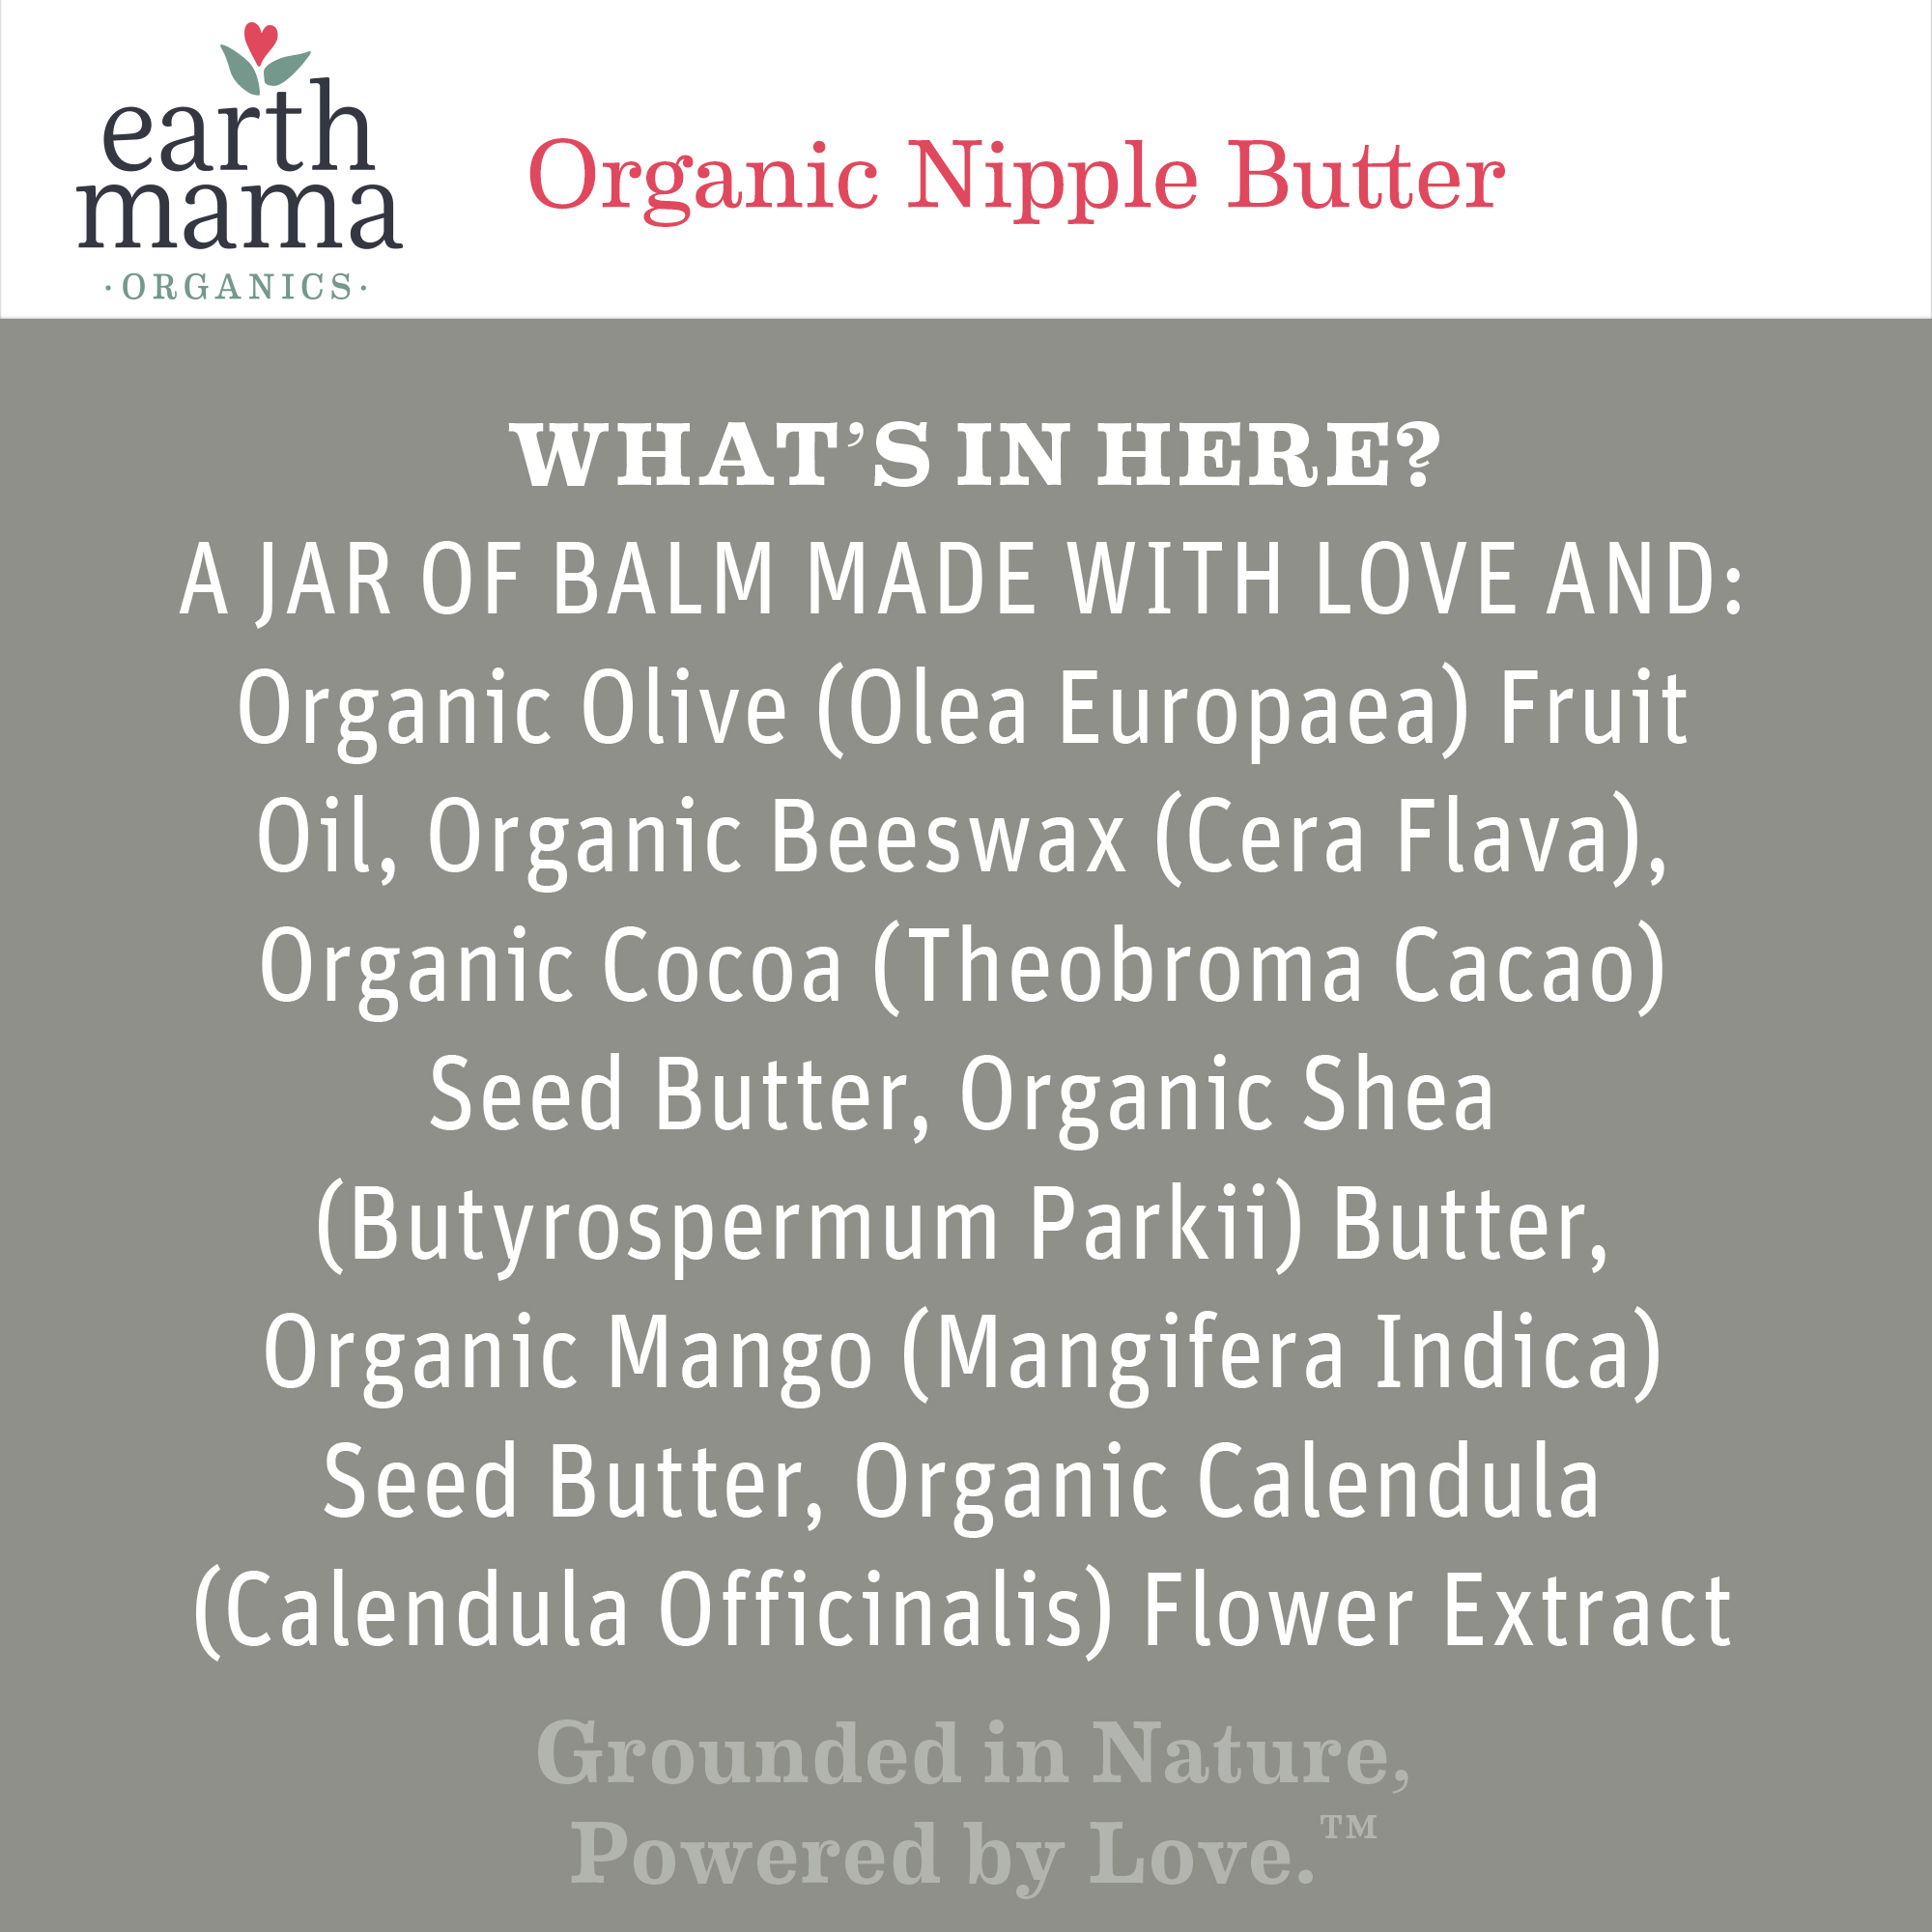 Earth Mama Nipple Butter – The Natural Baby Company